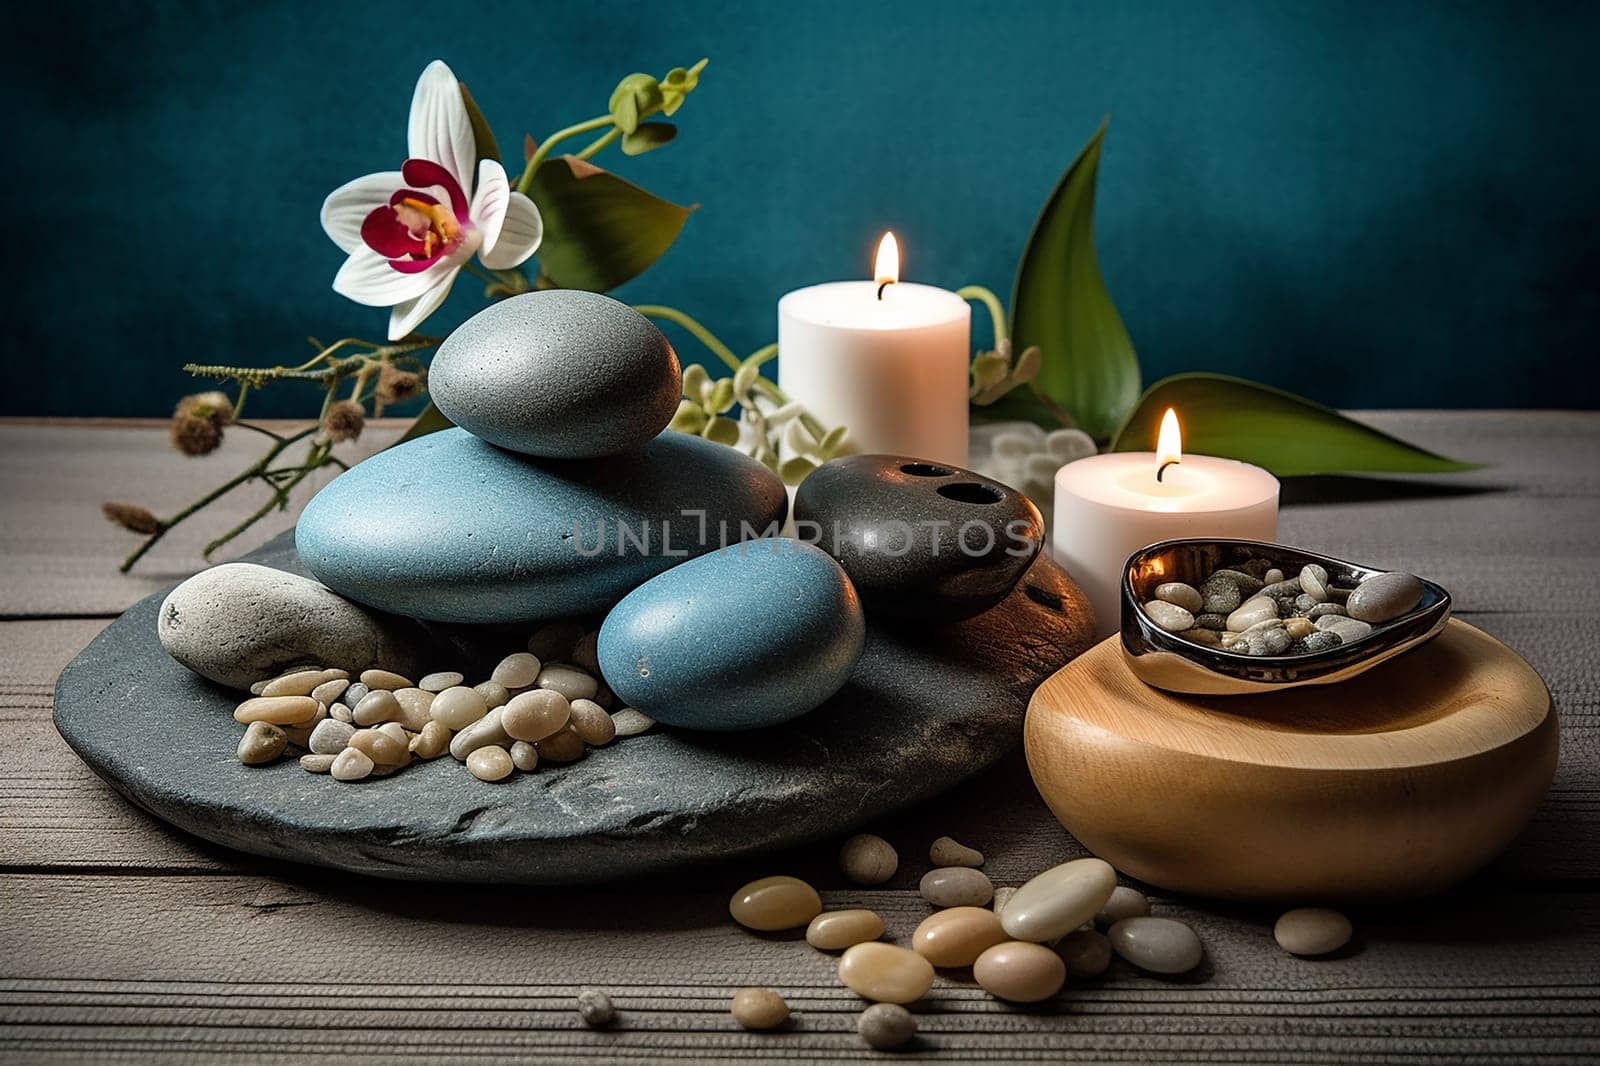 Soothing spa setting with candles, stones, and an orchid on a serene backdrop